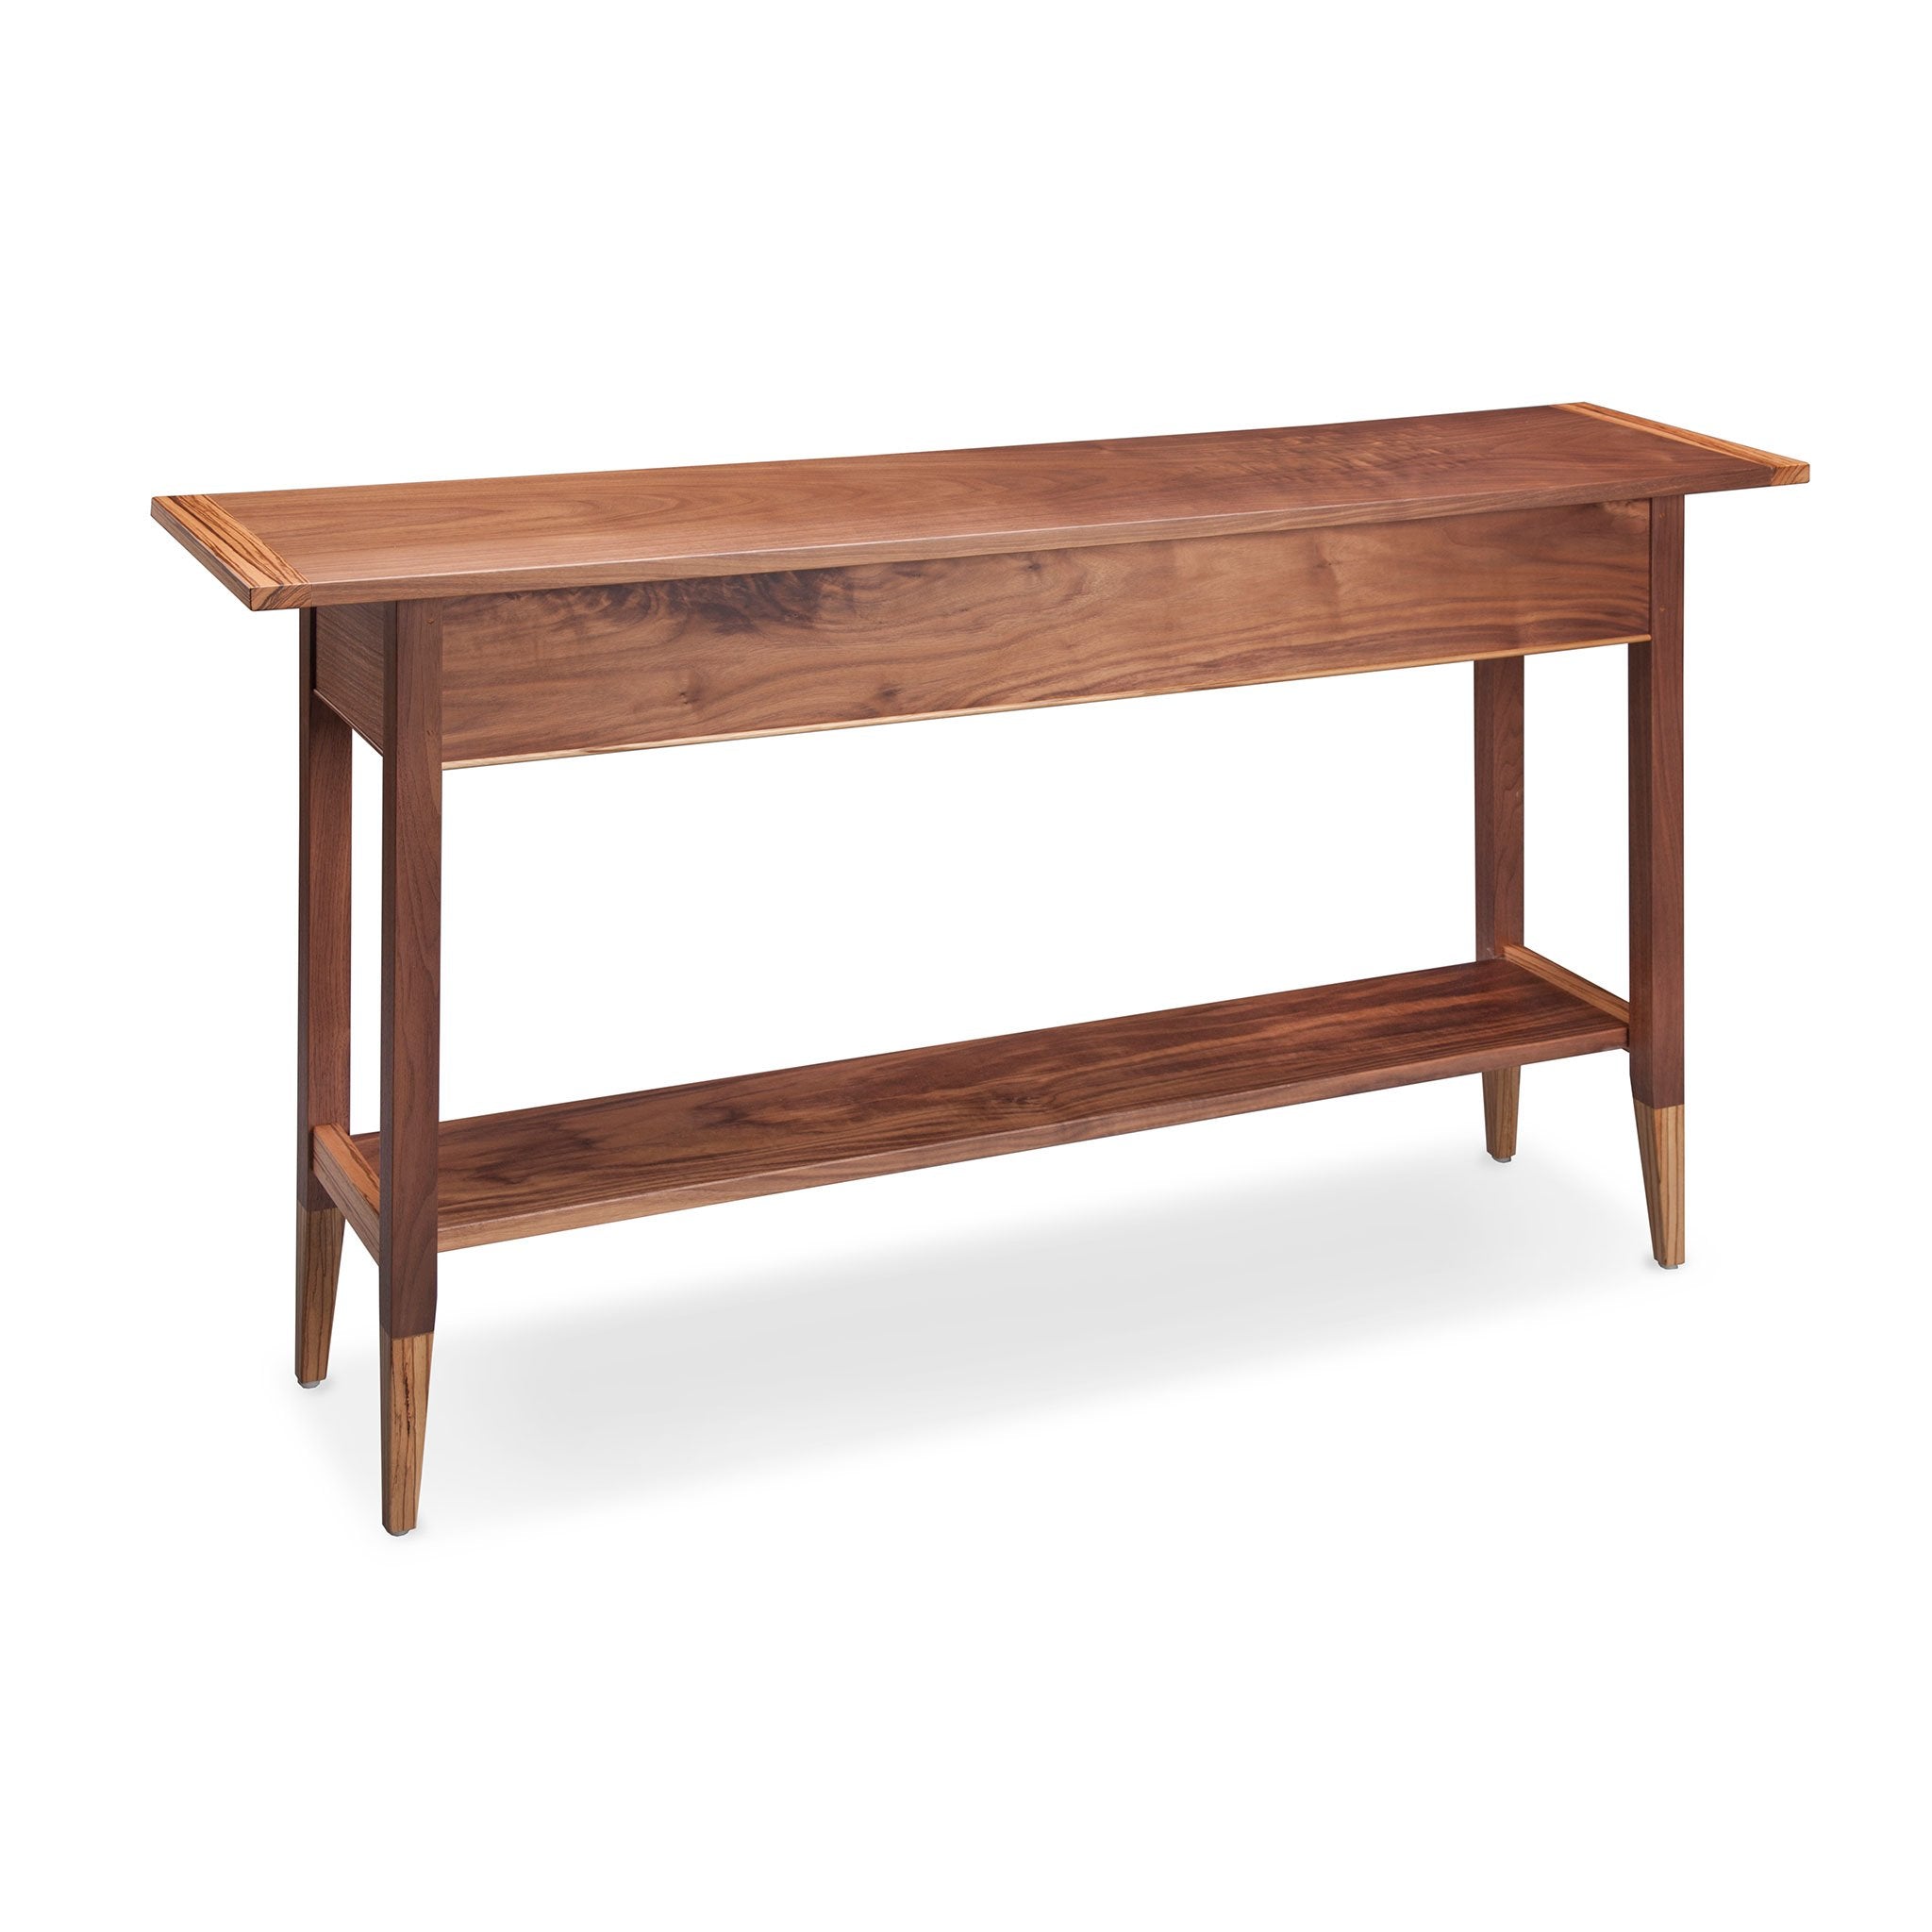 Walnut and Zebrawood Sofa Hall Table by Thomas William Furniture Shaker  Style Furniture – Sweetheart Gallery: Contemporary Craft Gallery, Fine  American Craft, Art, Design, Handmade Home & Personal Accessories